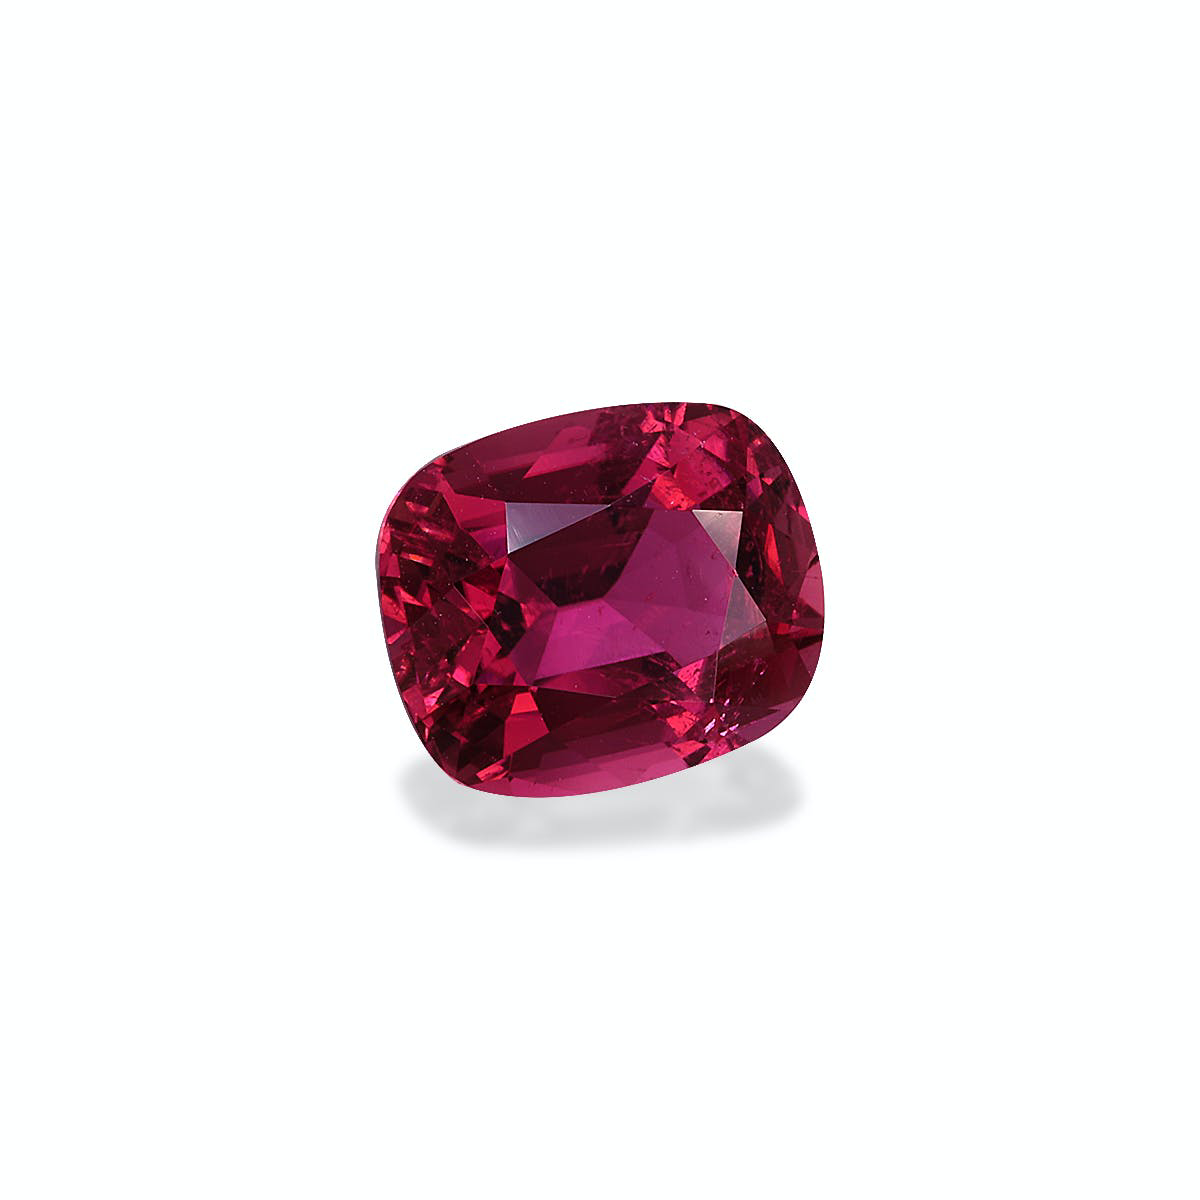 Picture of Rosewood Pink Tourmaline 3.18ct (PT1220)